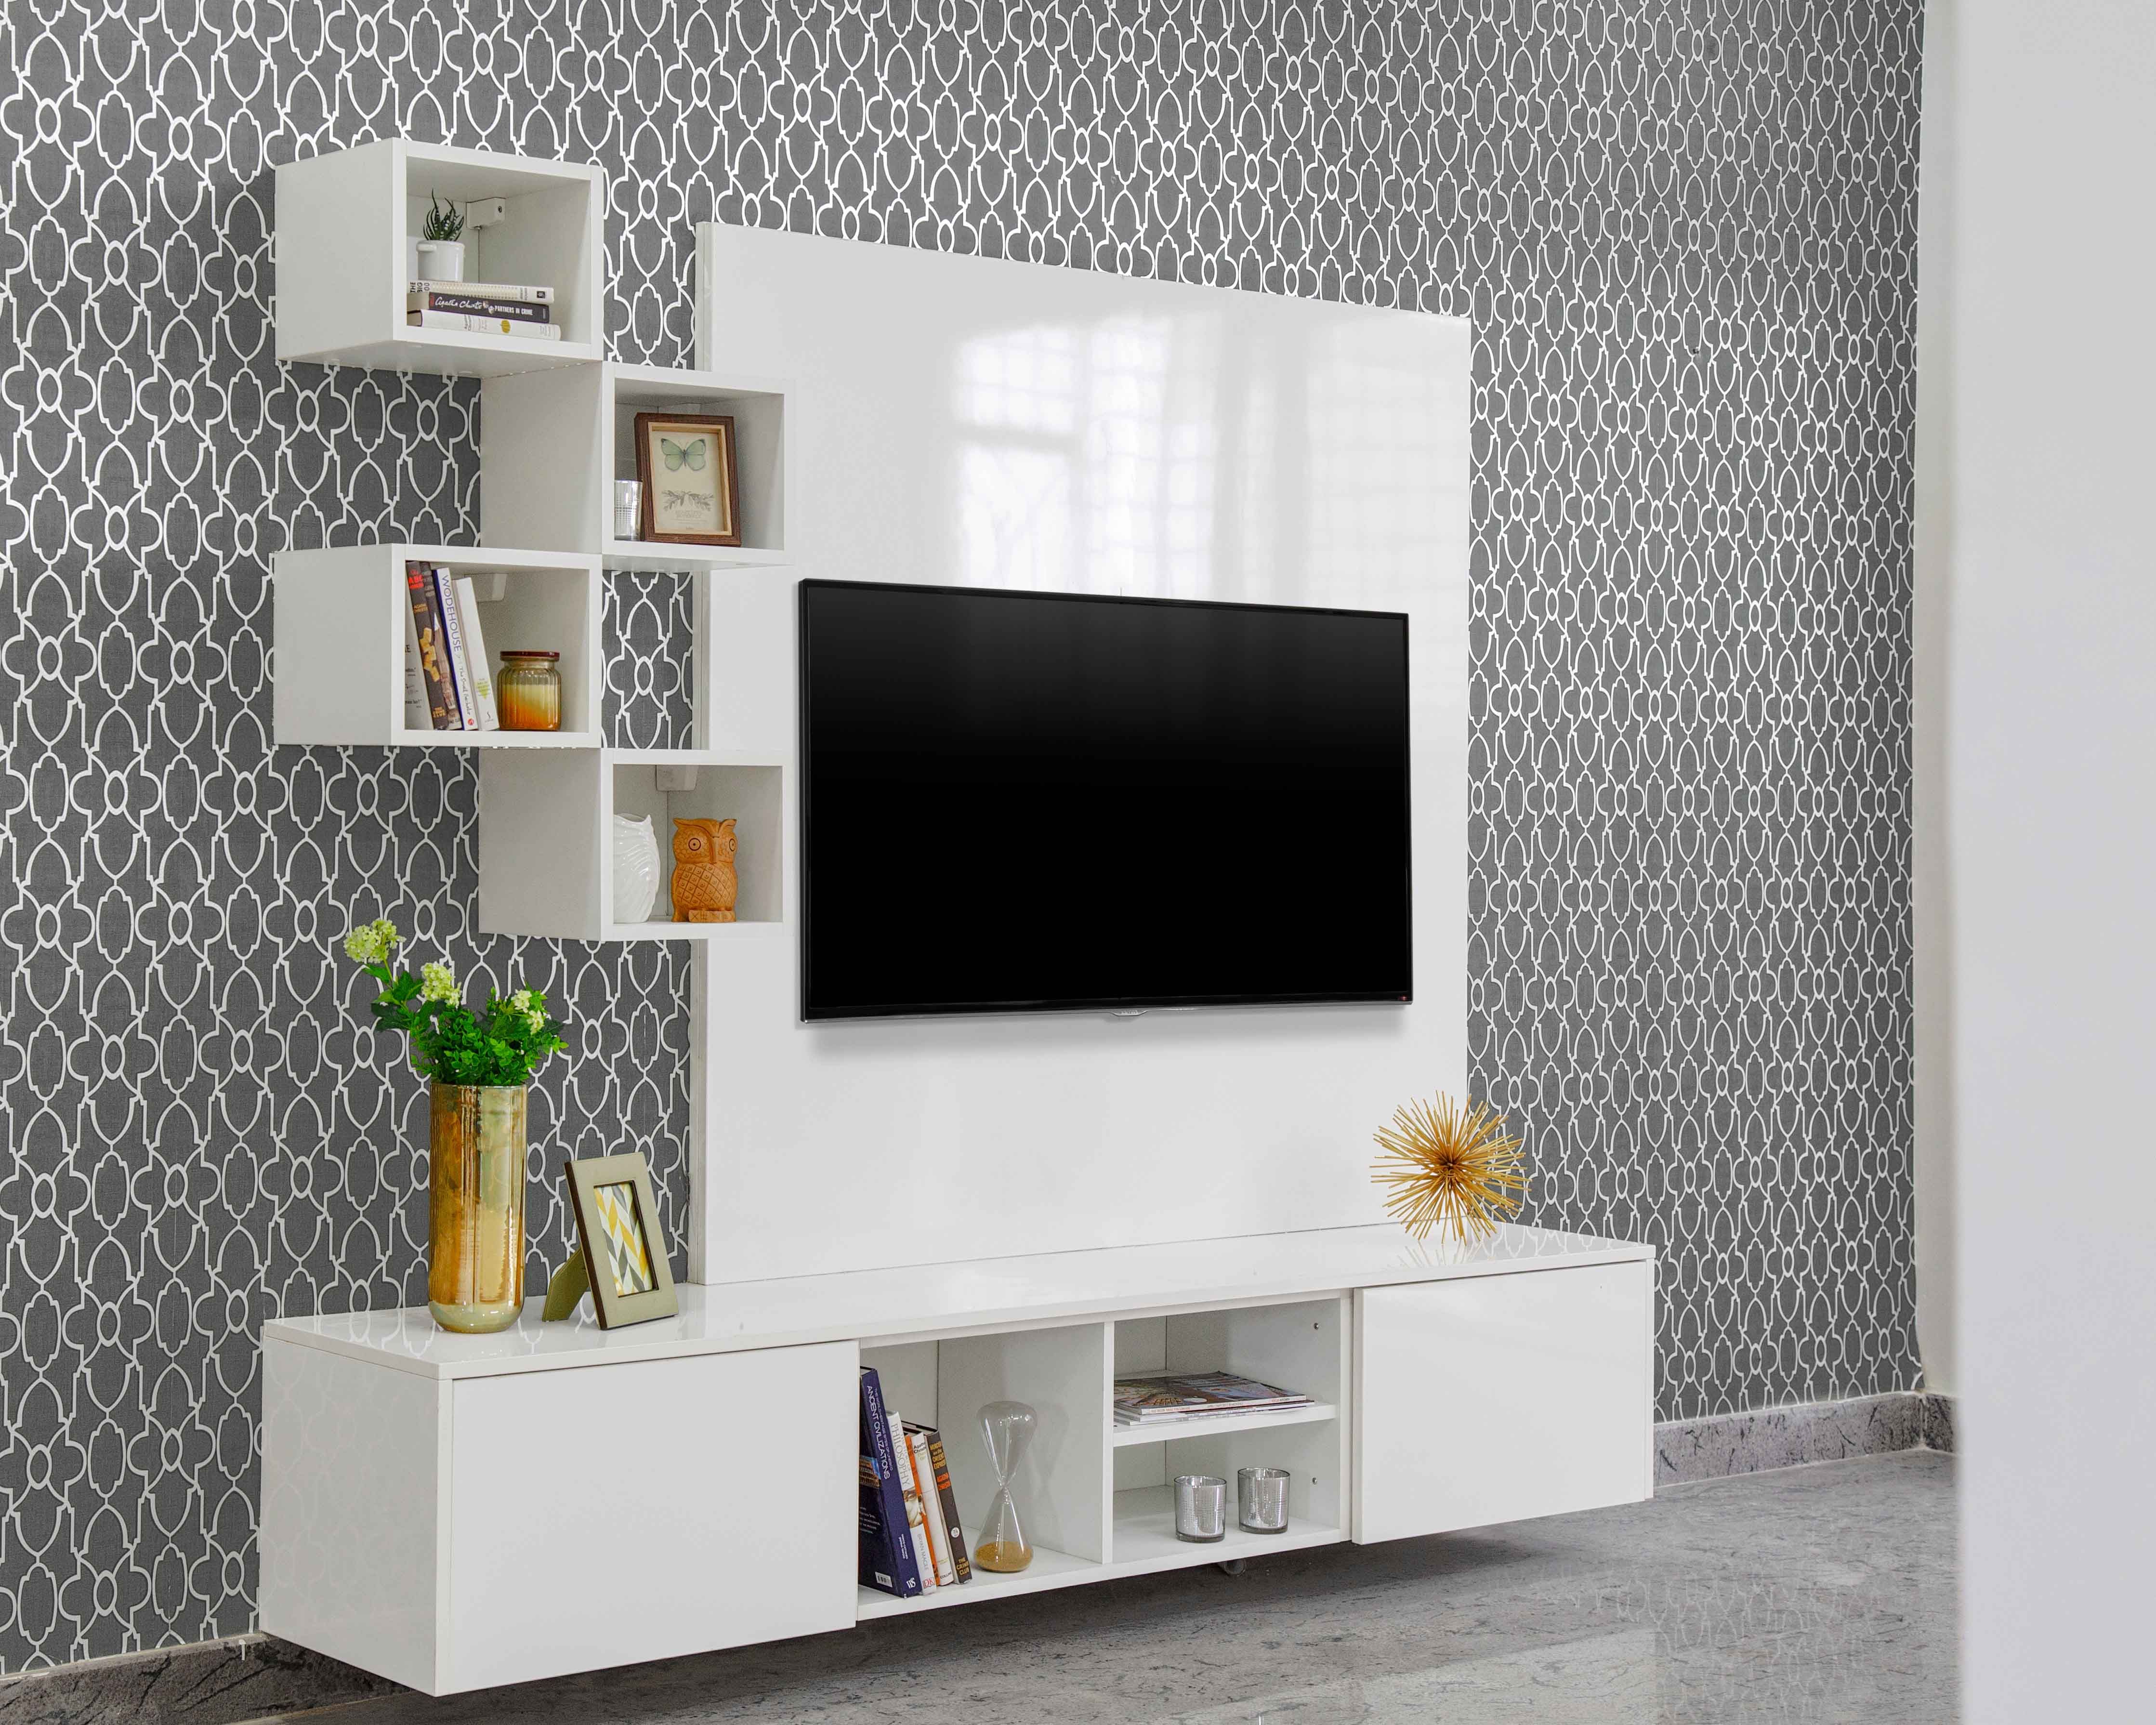 Minimal White TV Unit Design With Grey Patterned Wallpaper